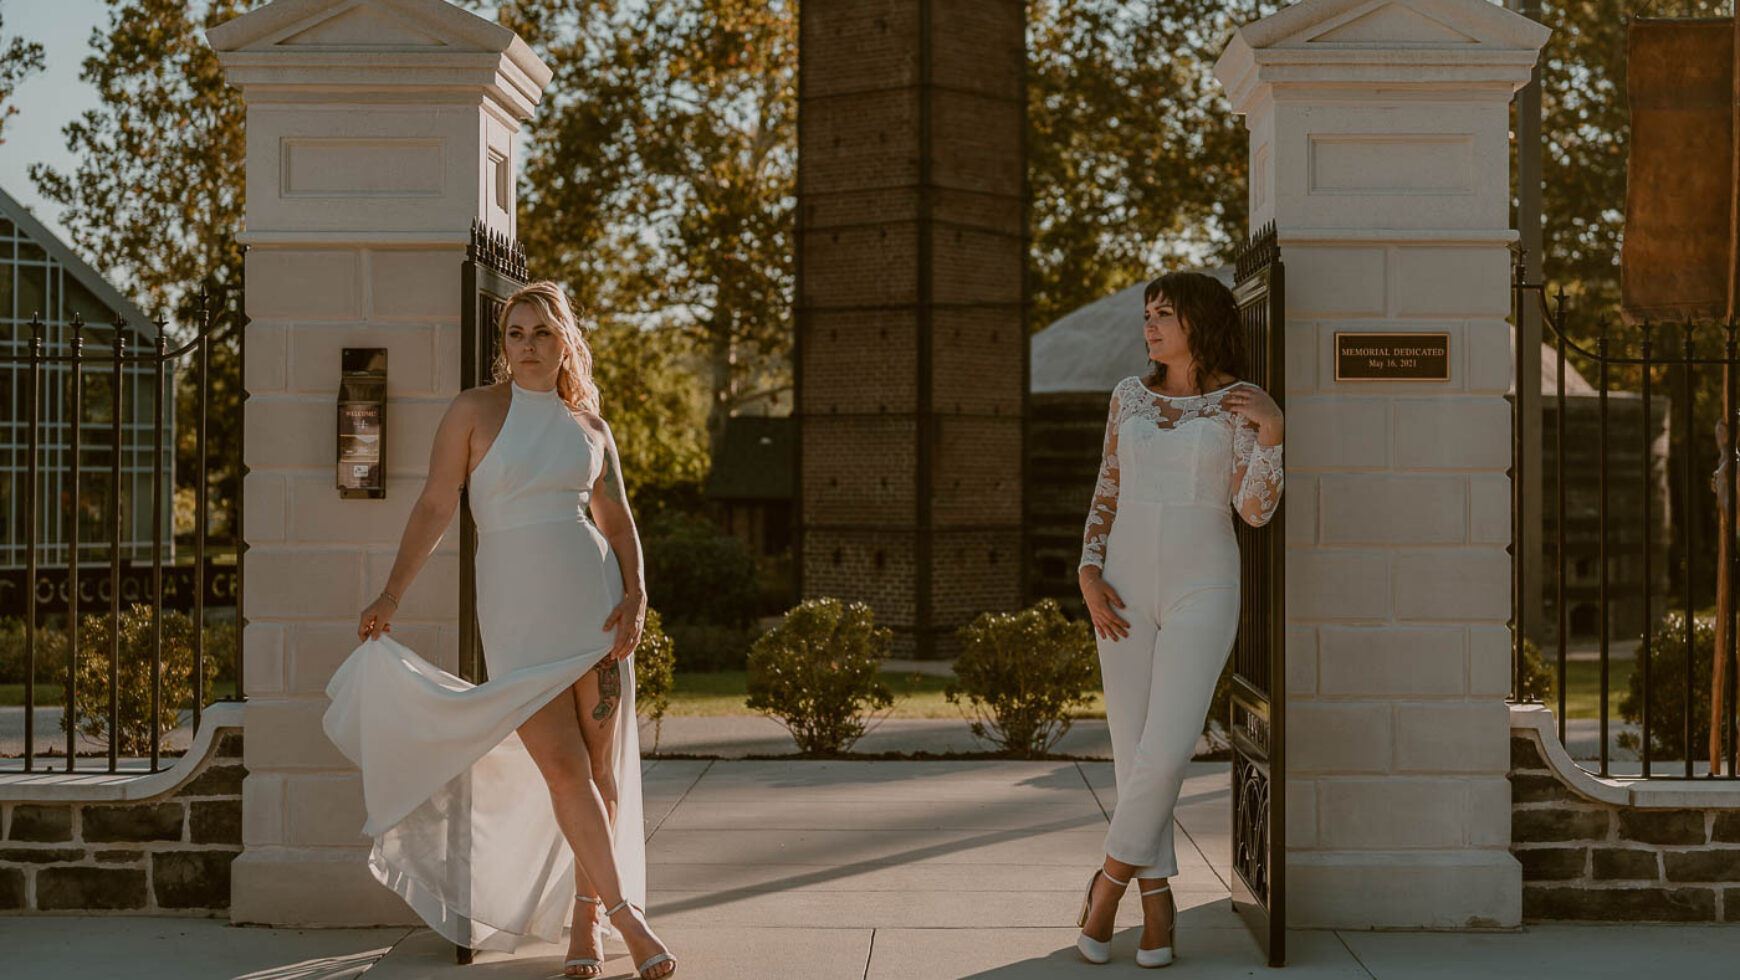 Lesbian Wedding Ideas From Our Riverview at Occoquan Styled Shoot